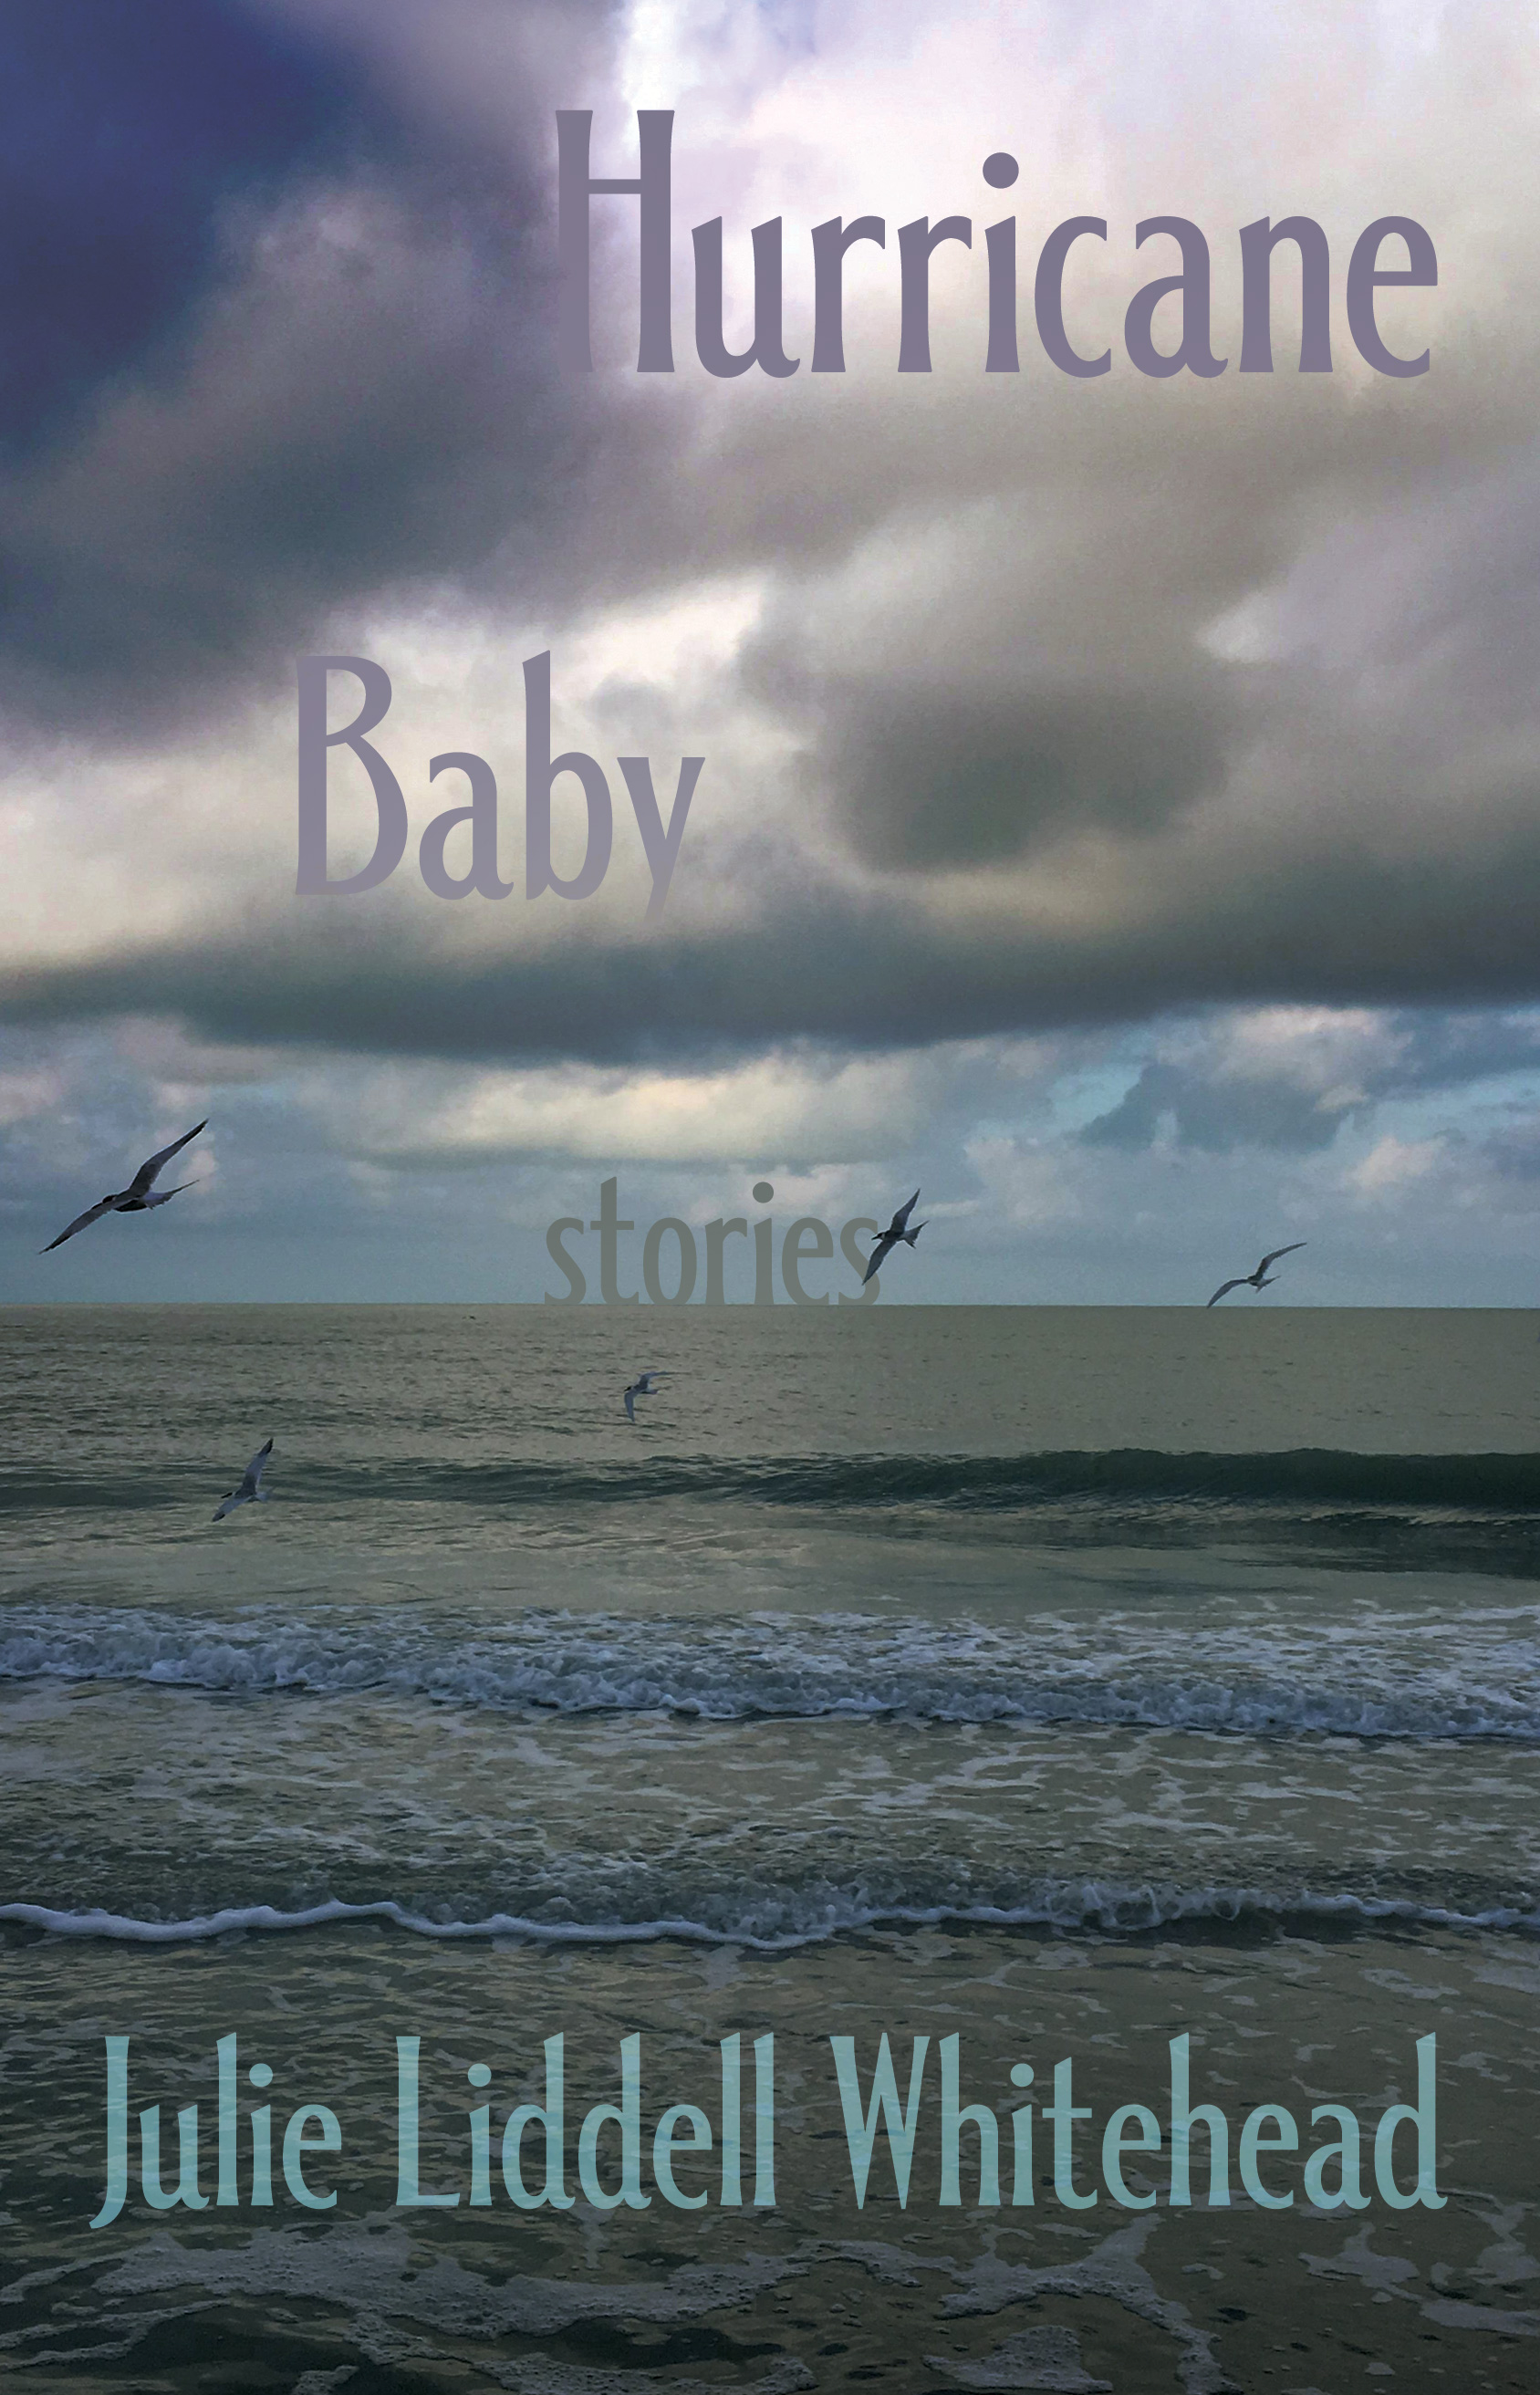 Blue and gray seascape photograph with the title Hurricane Baby: Stories